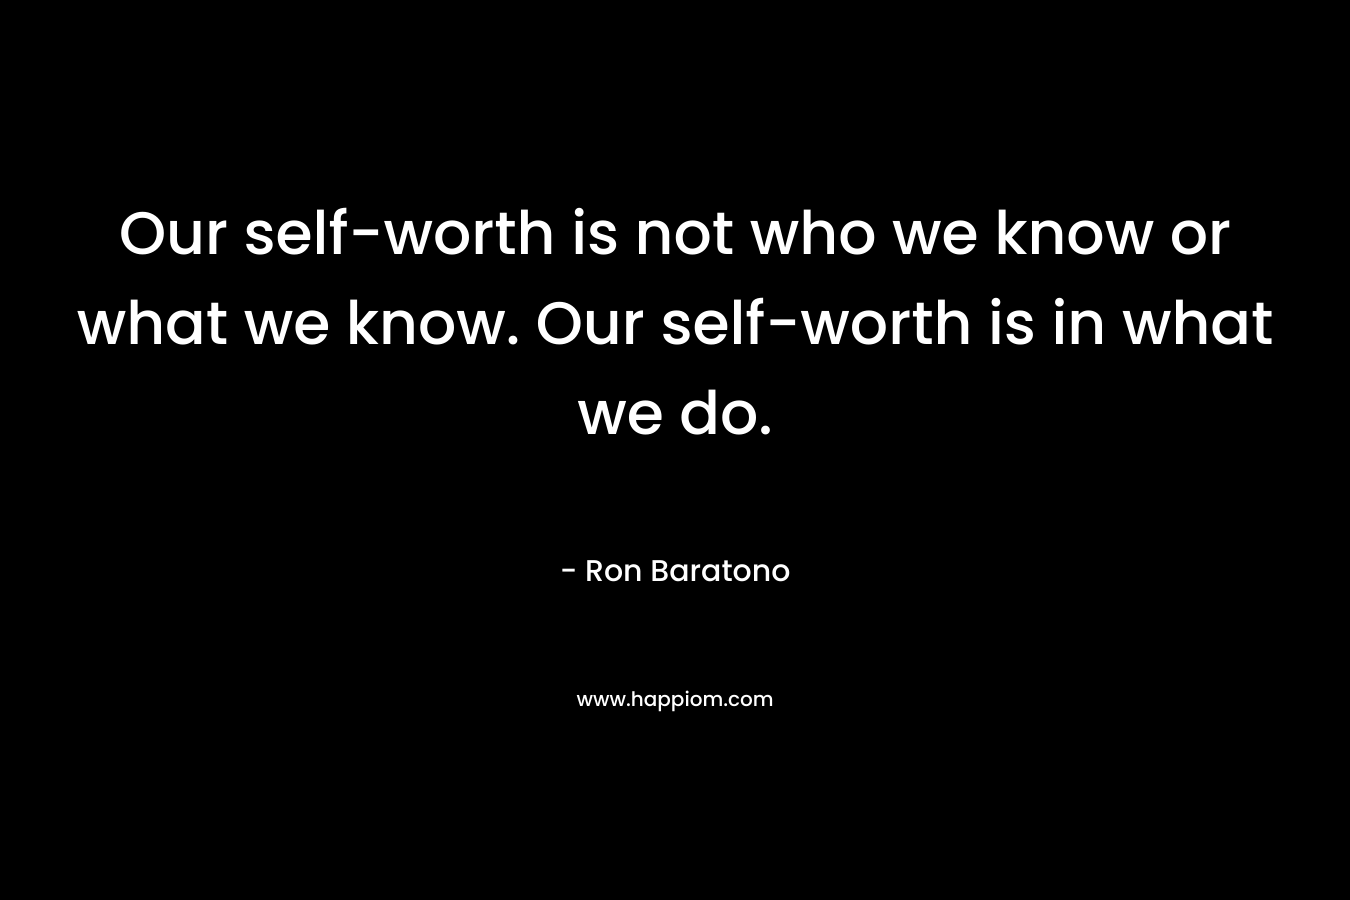 Our self-worth is not who we know or what we know. Our self-worth is in what we do. – Ron Baratono